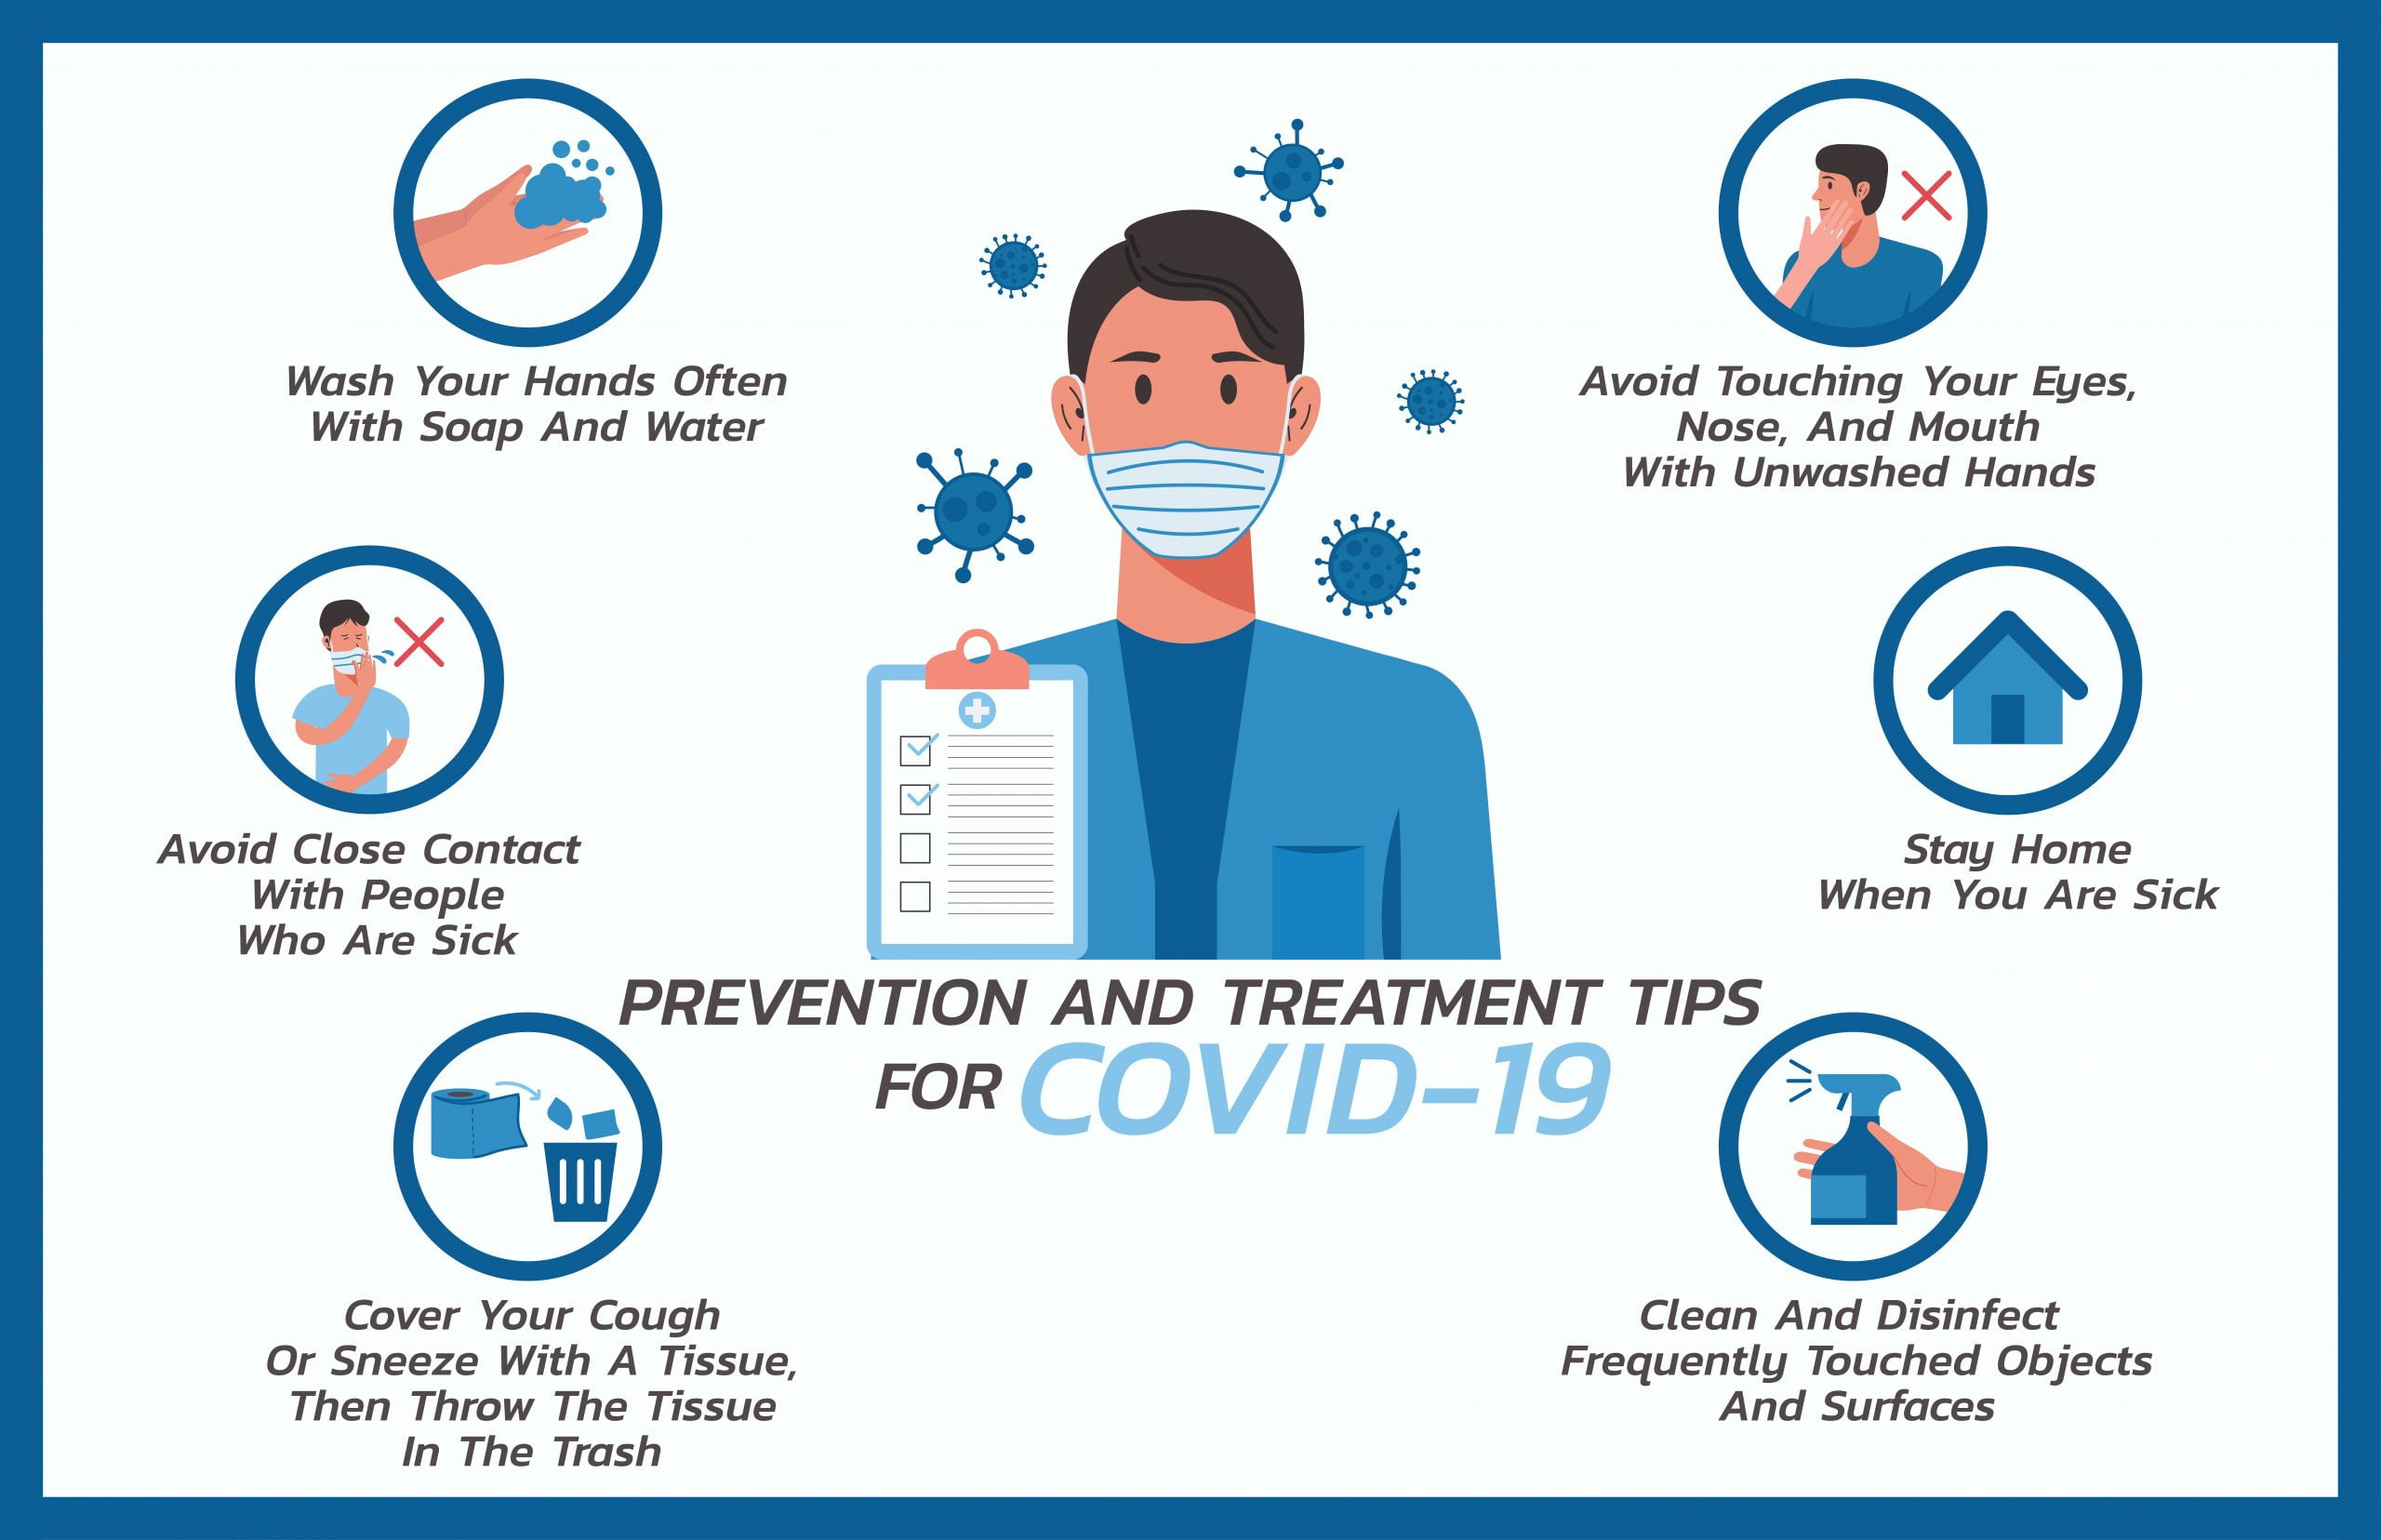 Prevention and Treatment Tips for COVID-19